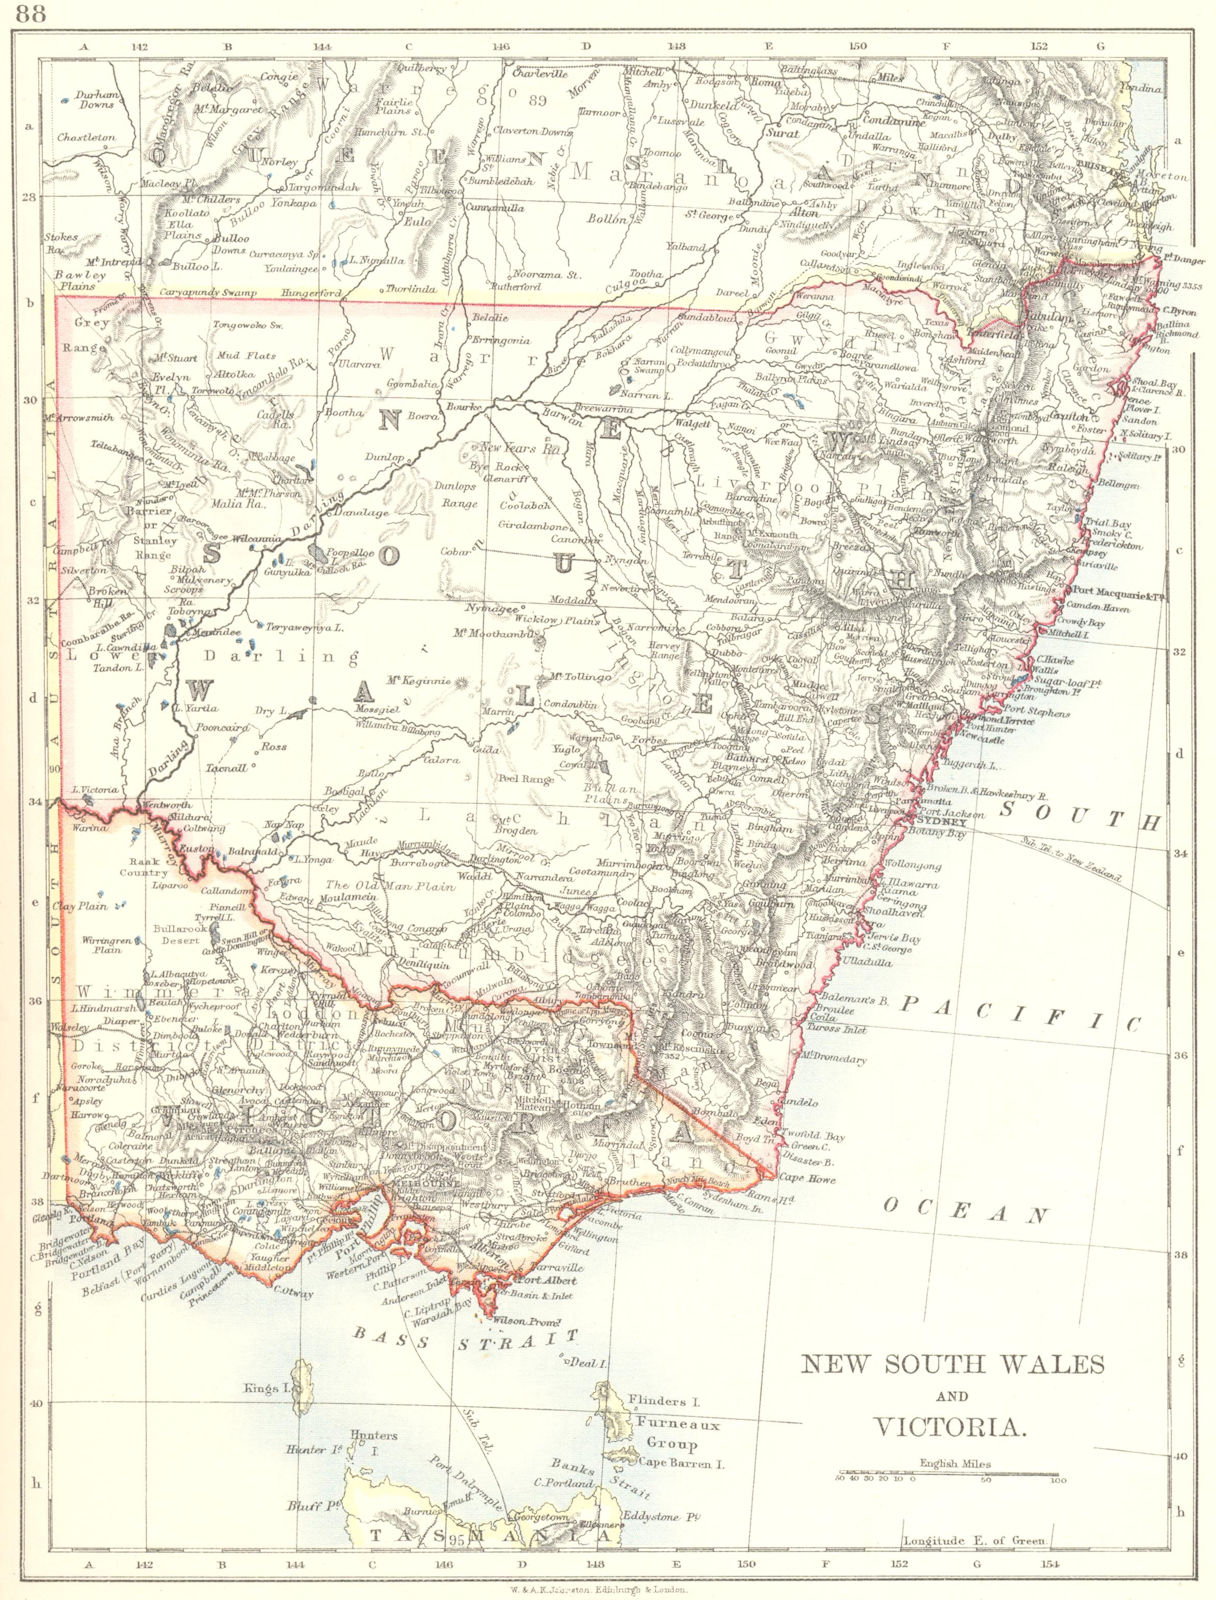 NEW SOUTH WALES & VICTORIA. Shows railways telegraph cables. Australia 1899 map